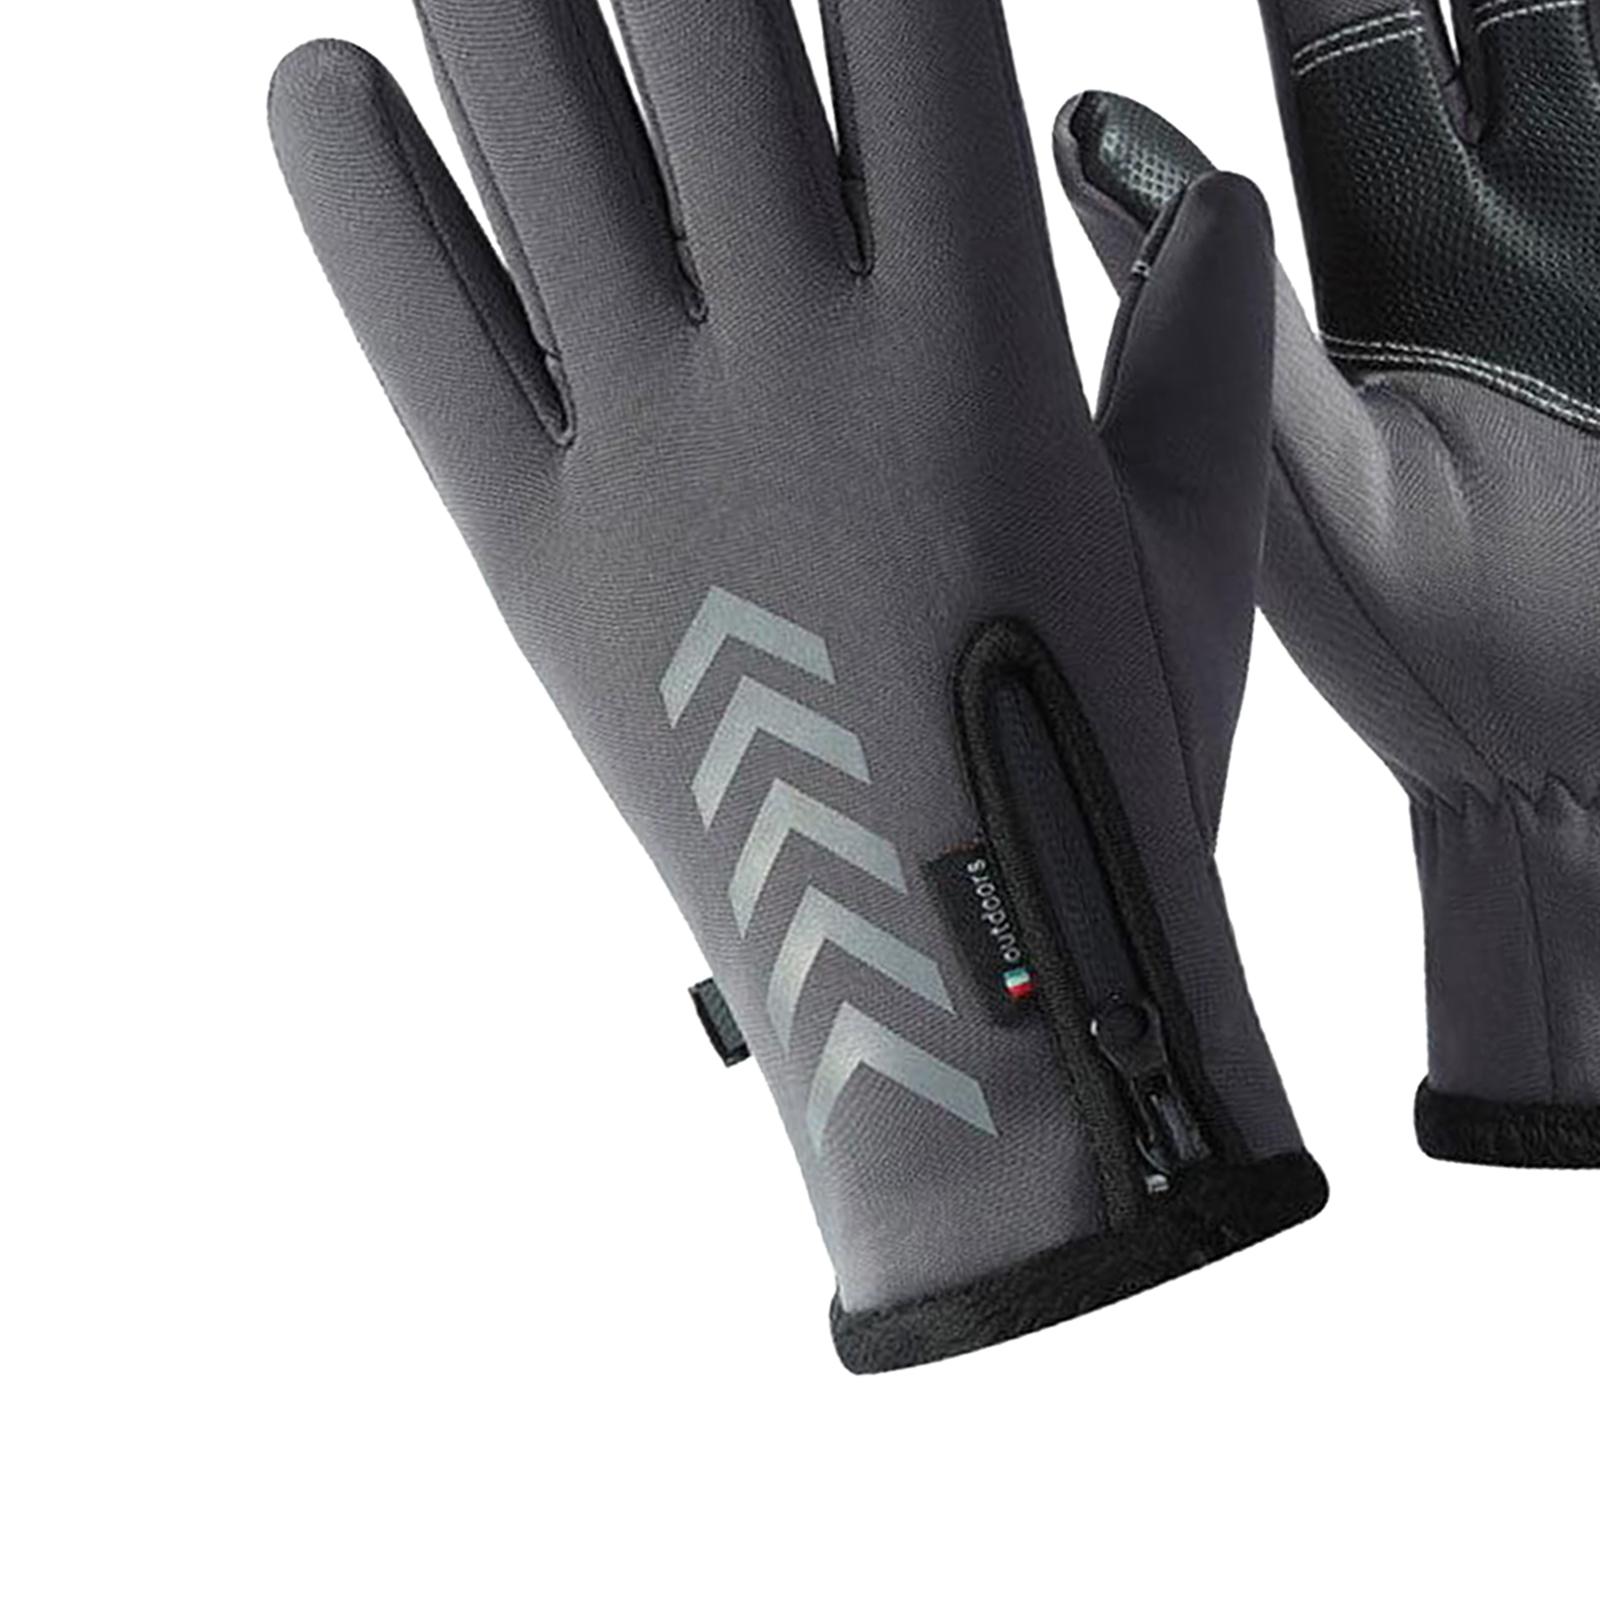 Winter Outdoor Cycling Hiking Sports Gloves Touch Screen XL Gray K112